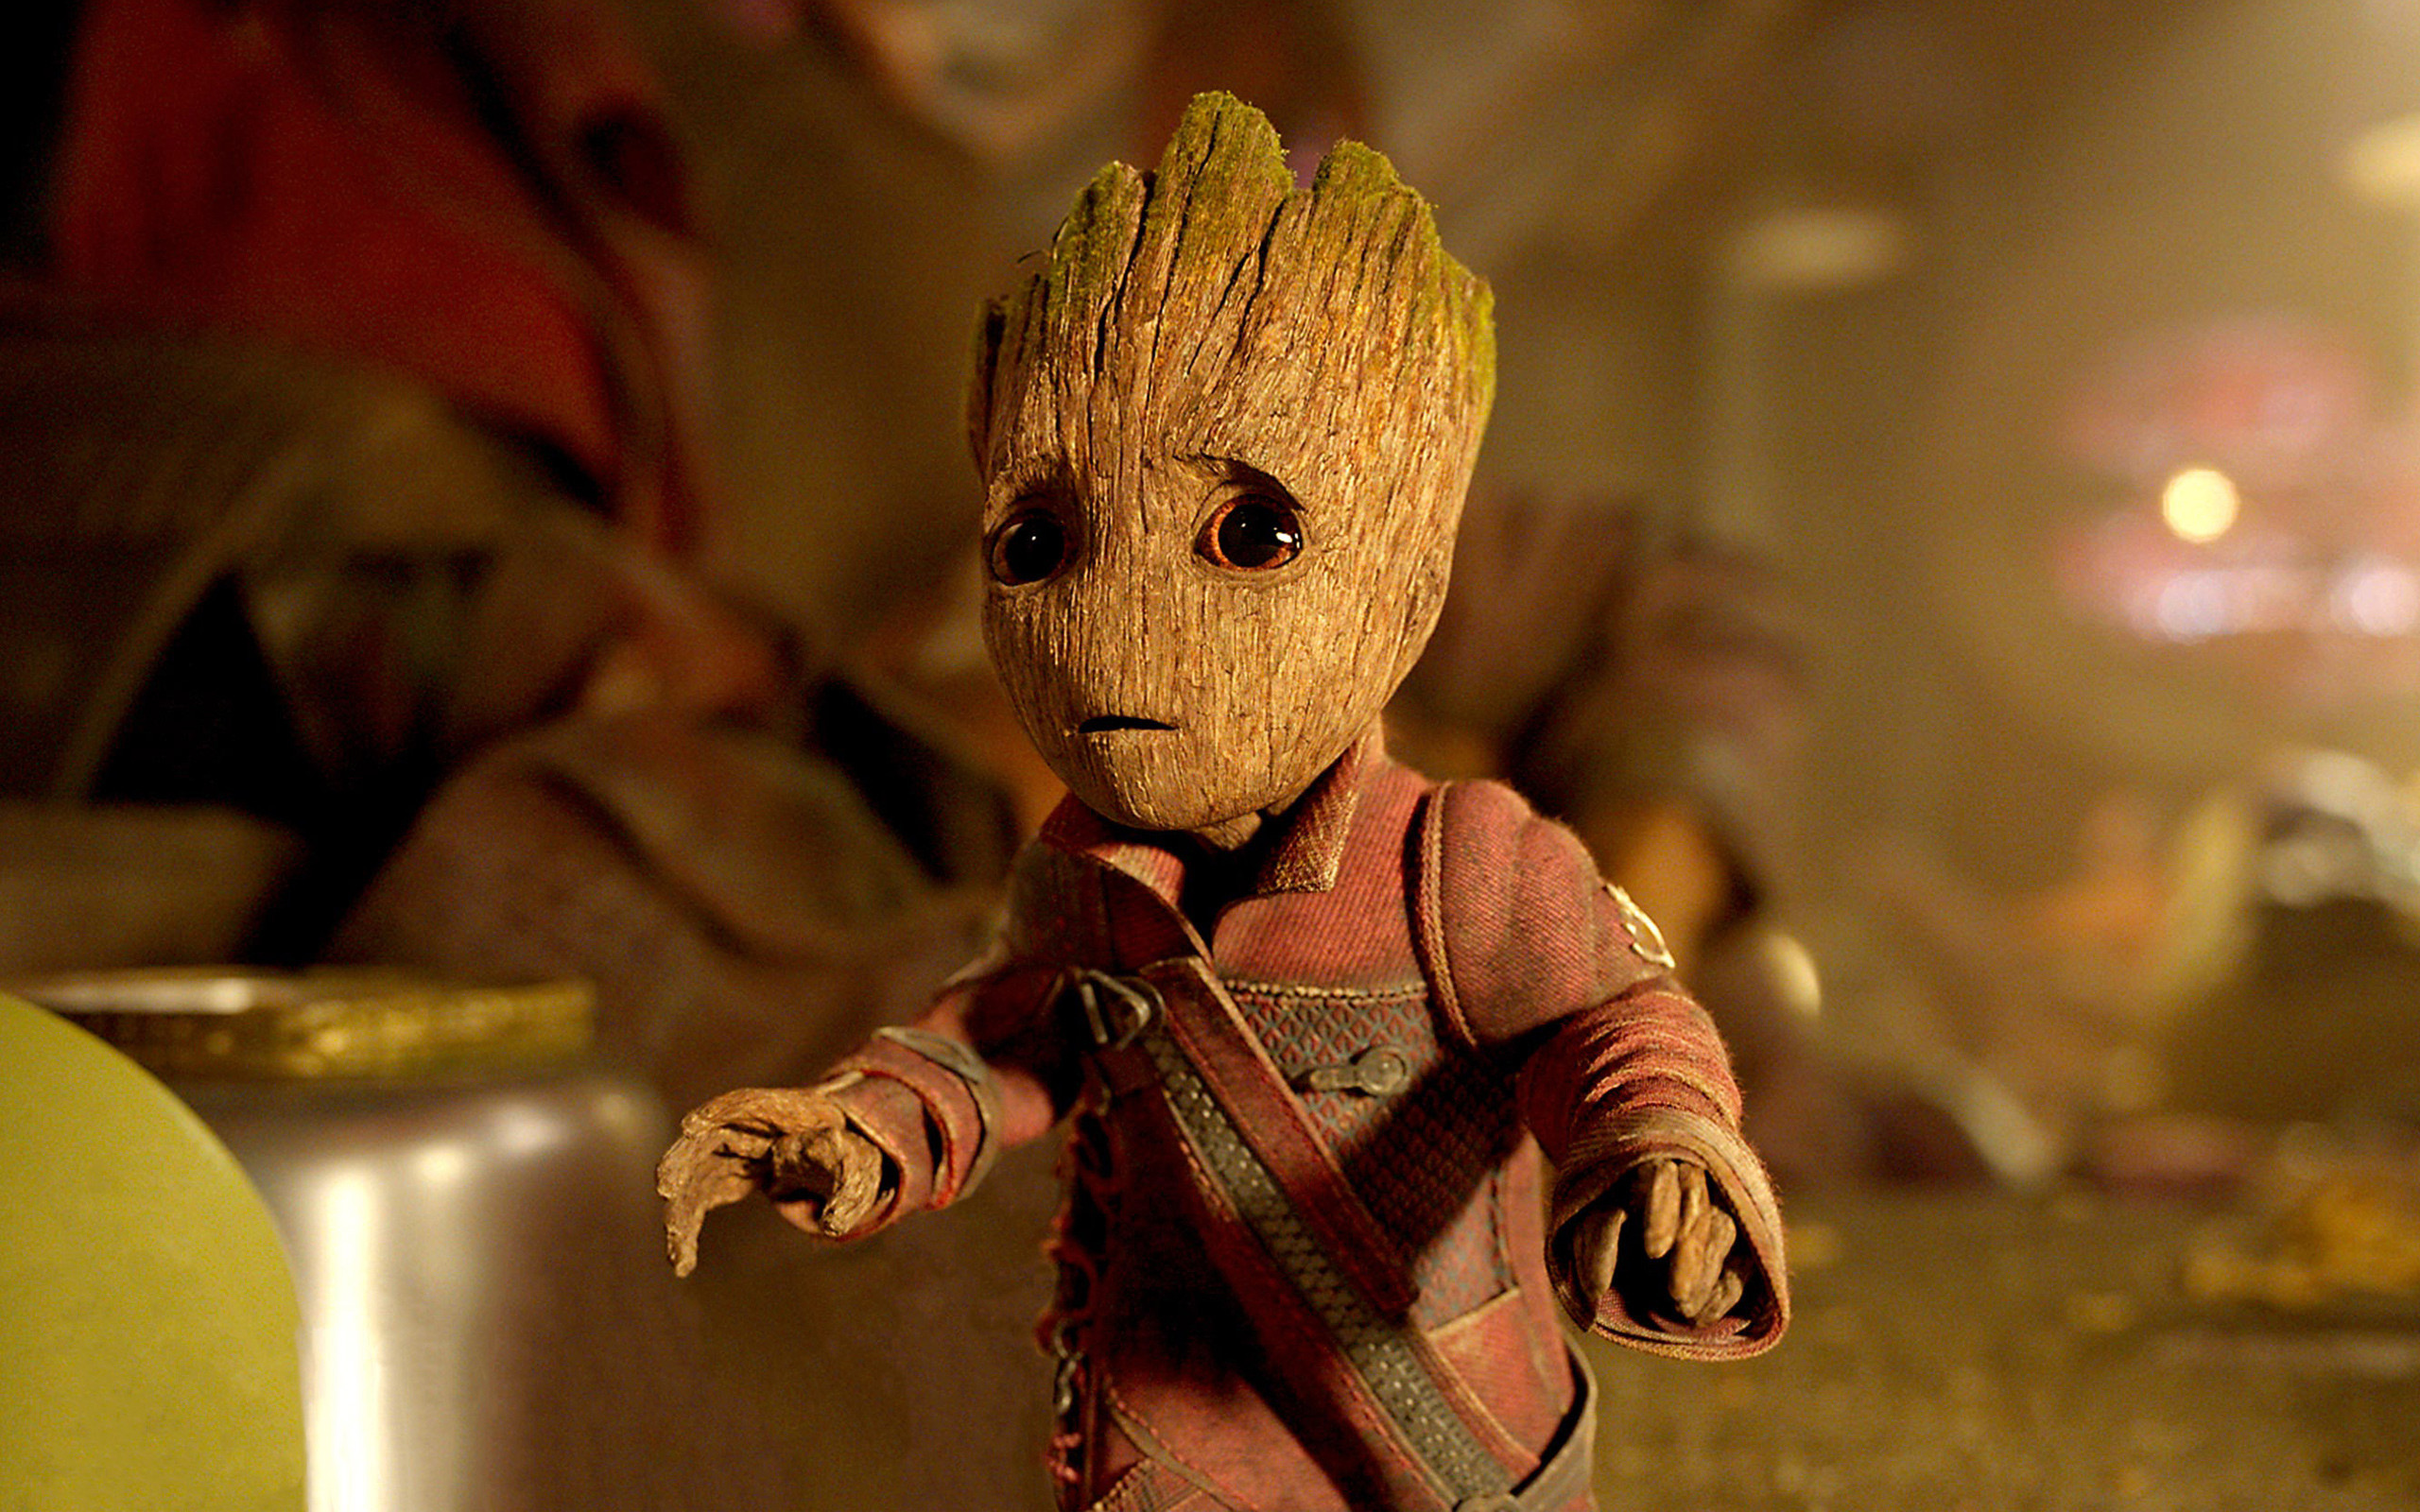 Baby Groot dancing wallpapers, Lively backgrounds, Marvel Studios character, Guardians of the Galaxy, 2560x1600 HD Desktop